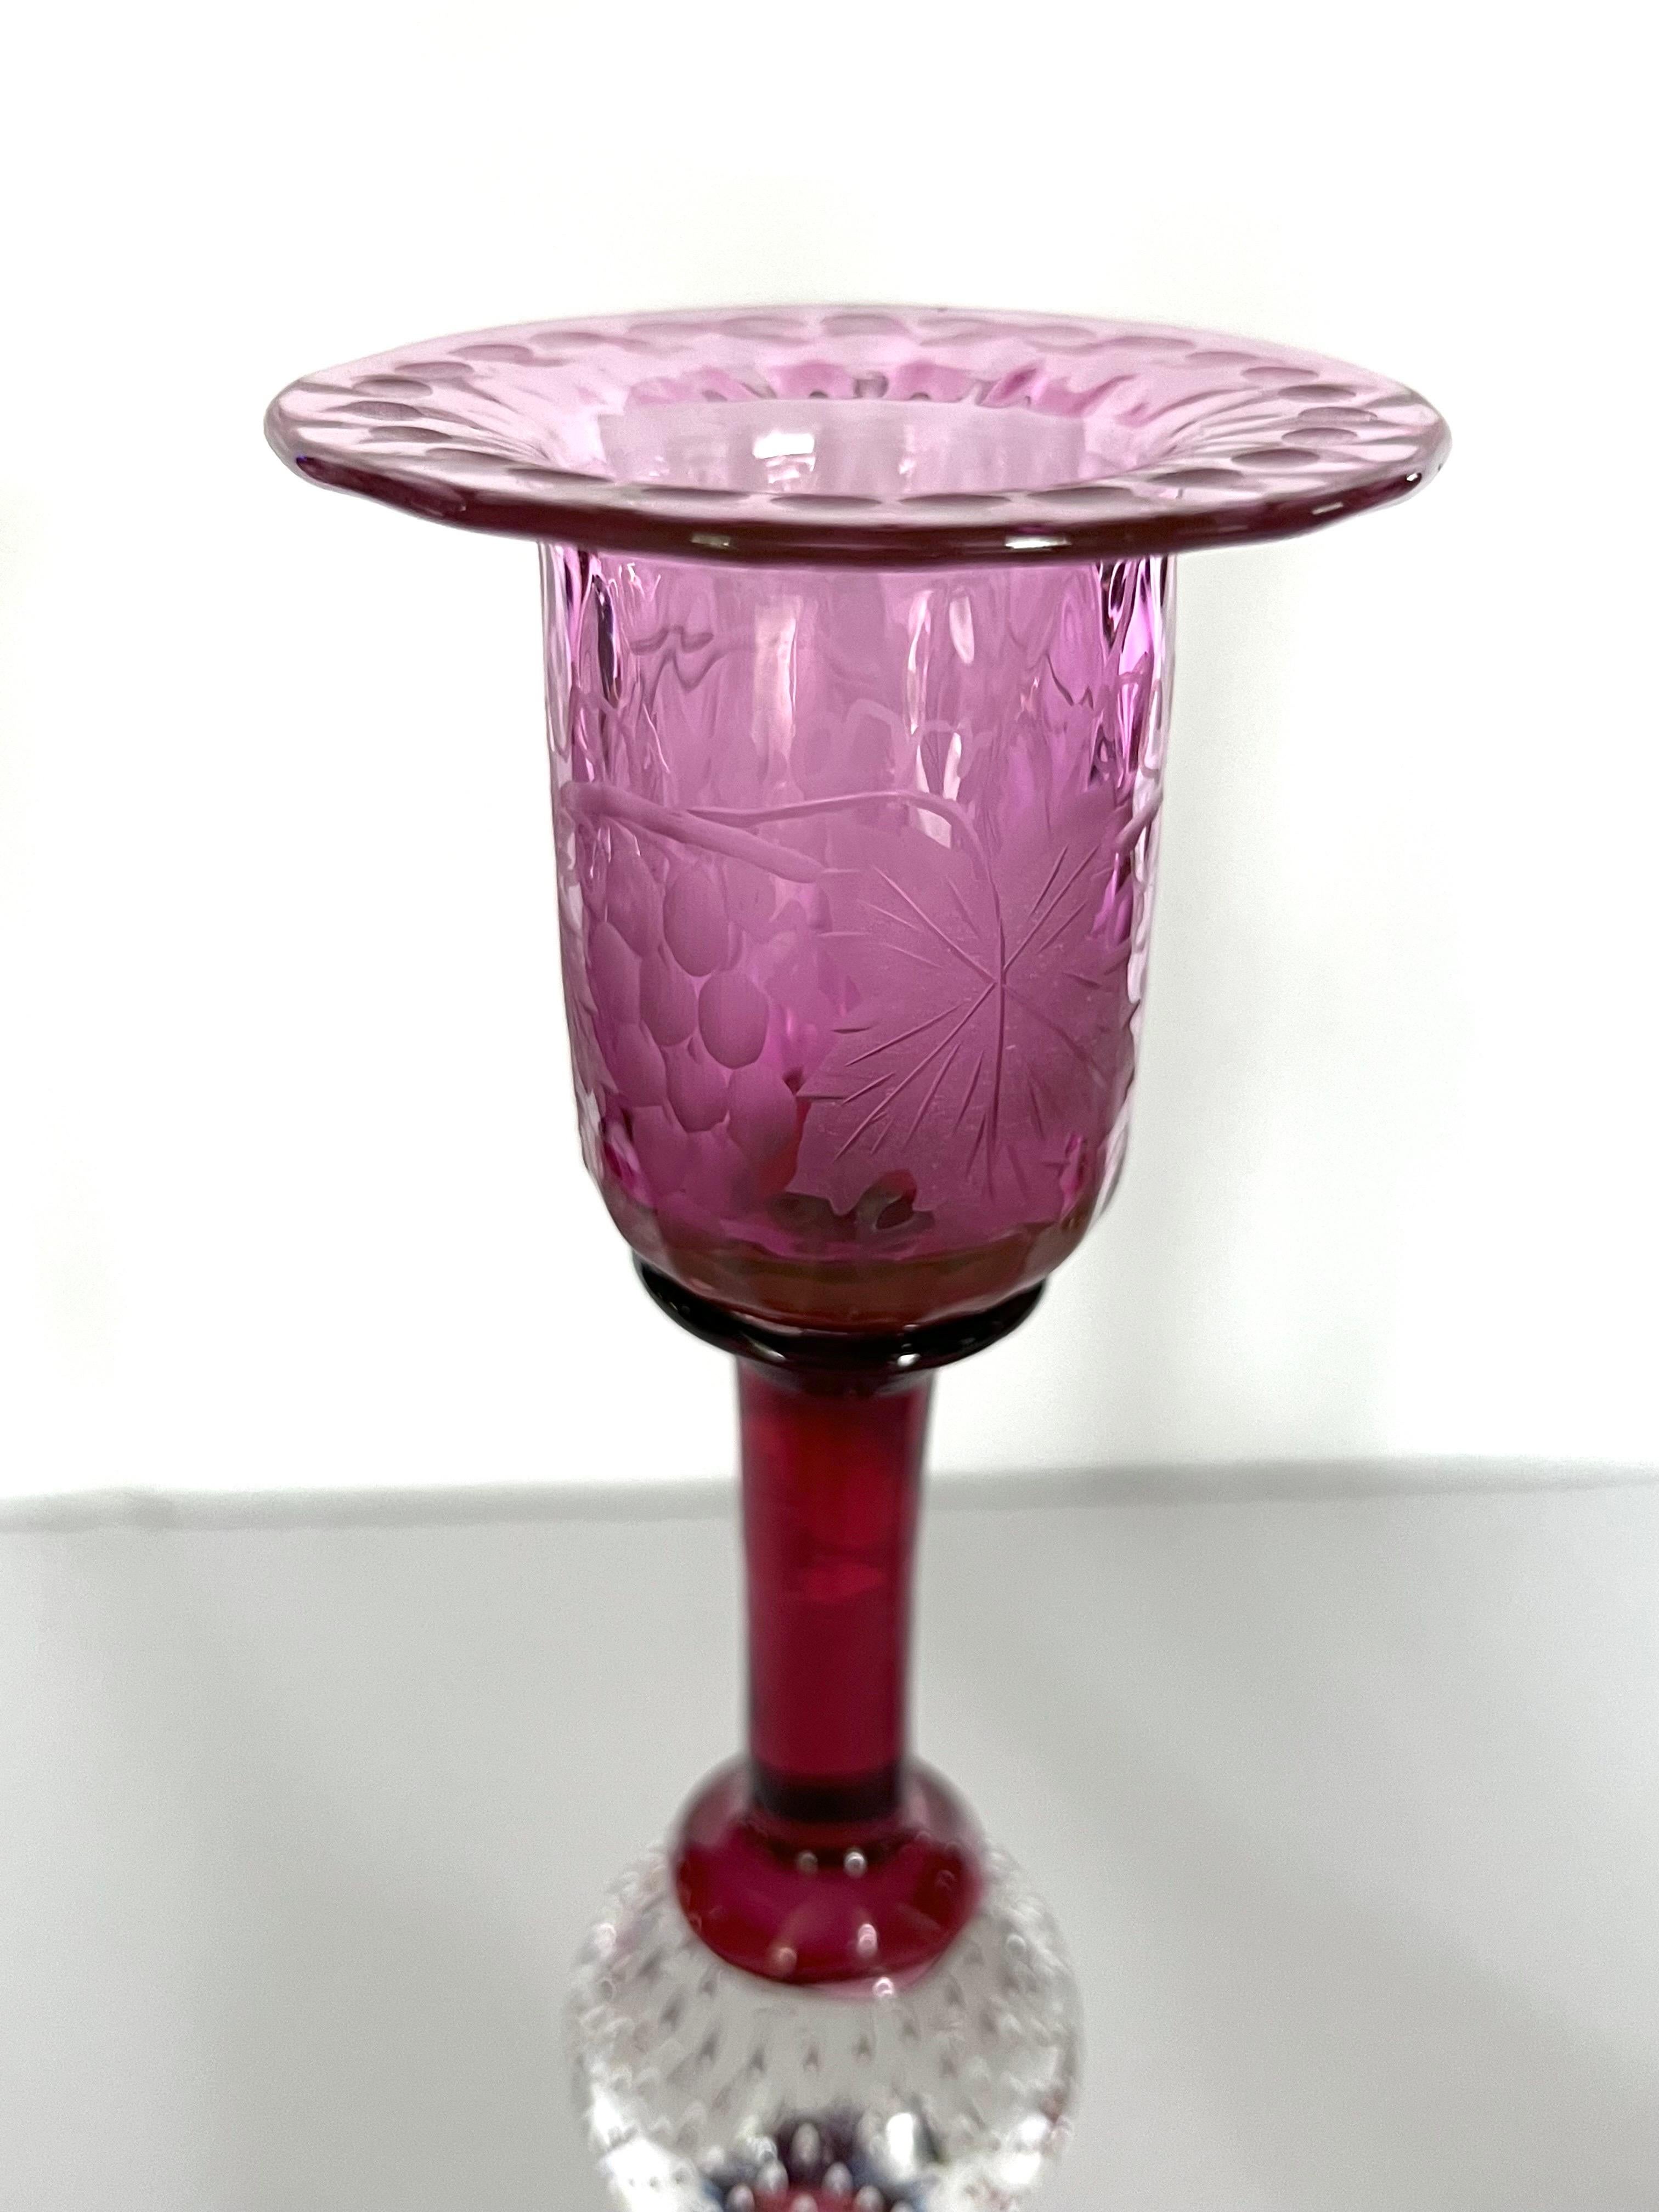 Pairpoint Engraved Cranberry Crystal Candlesticks, Controlled Bubble, C. 1930 In Excellent Condition For Sale In Fort Washington, MD